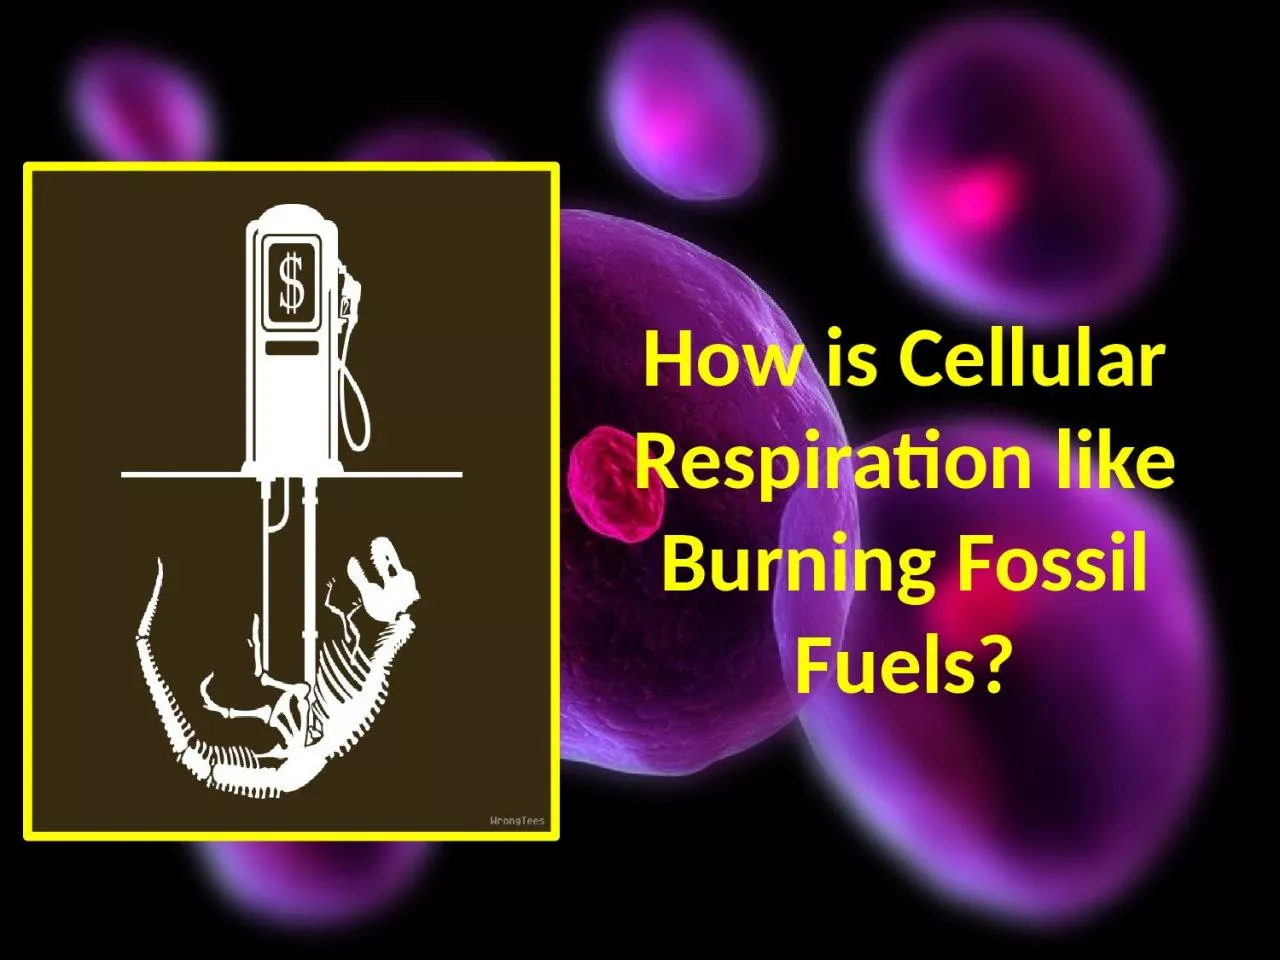 How is Cellular Respiration like Burning Fossil Fuels?